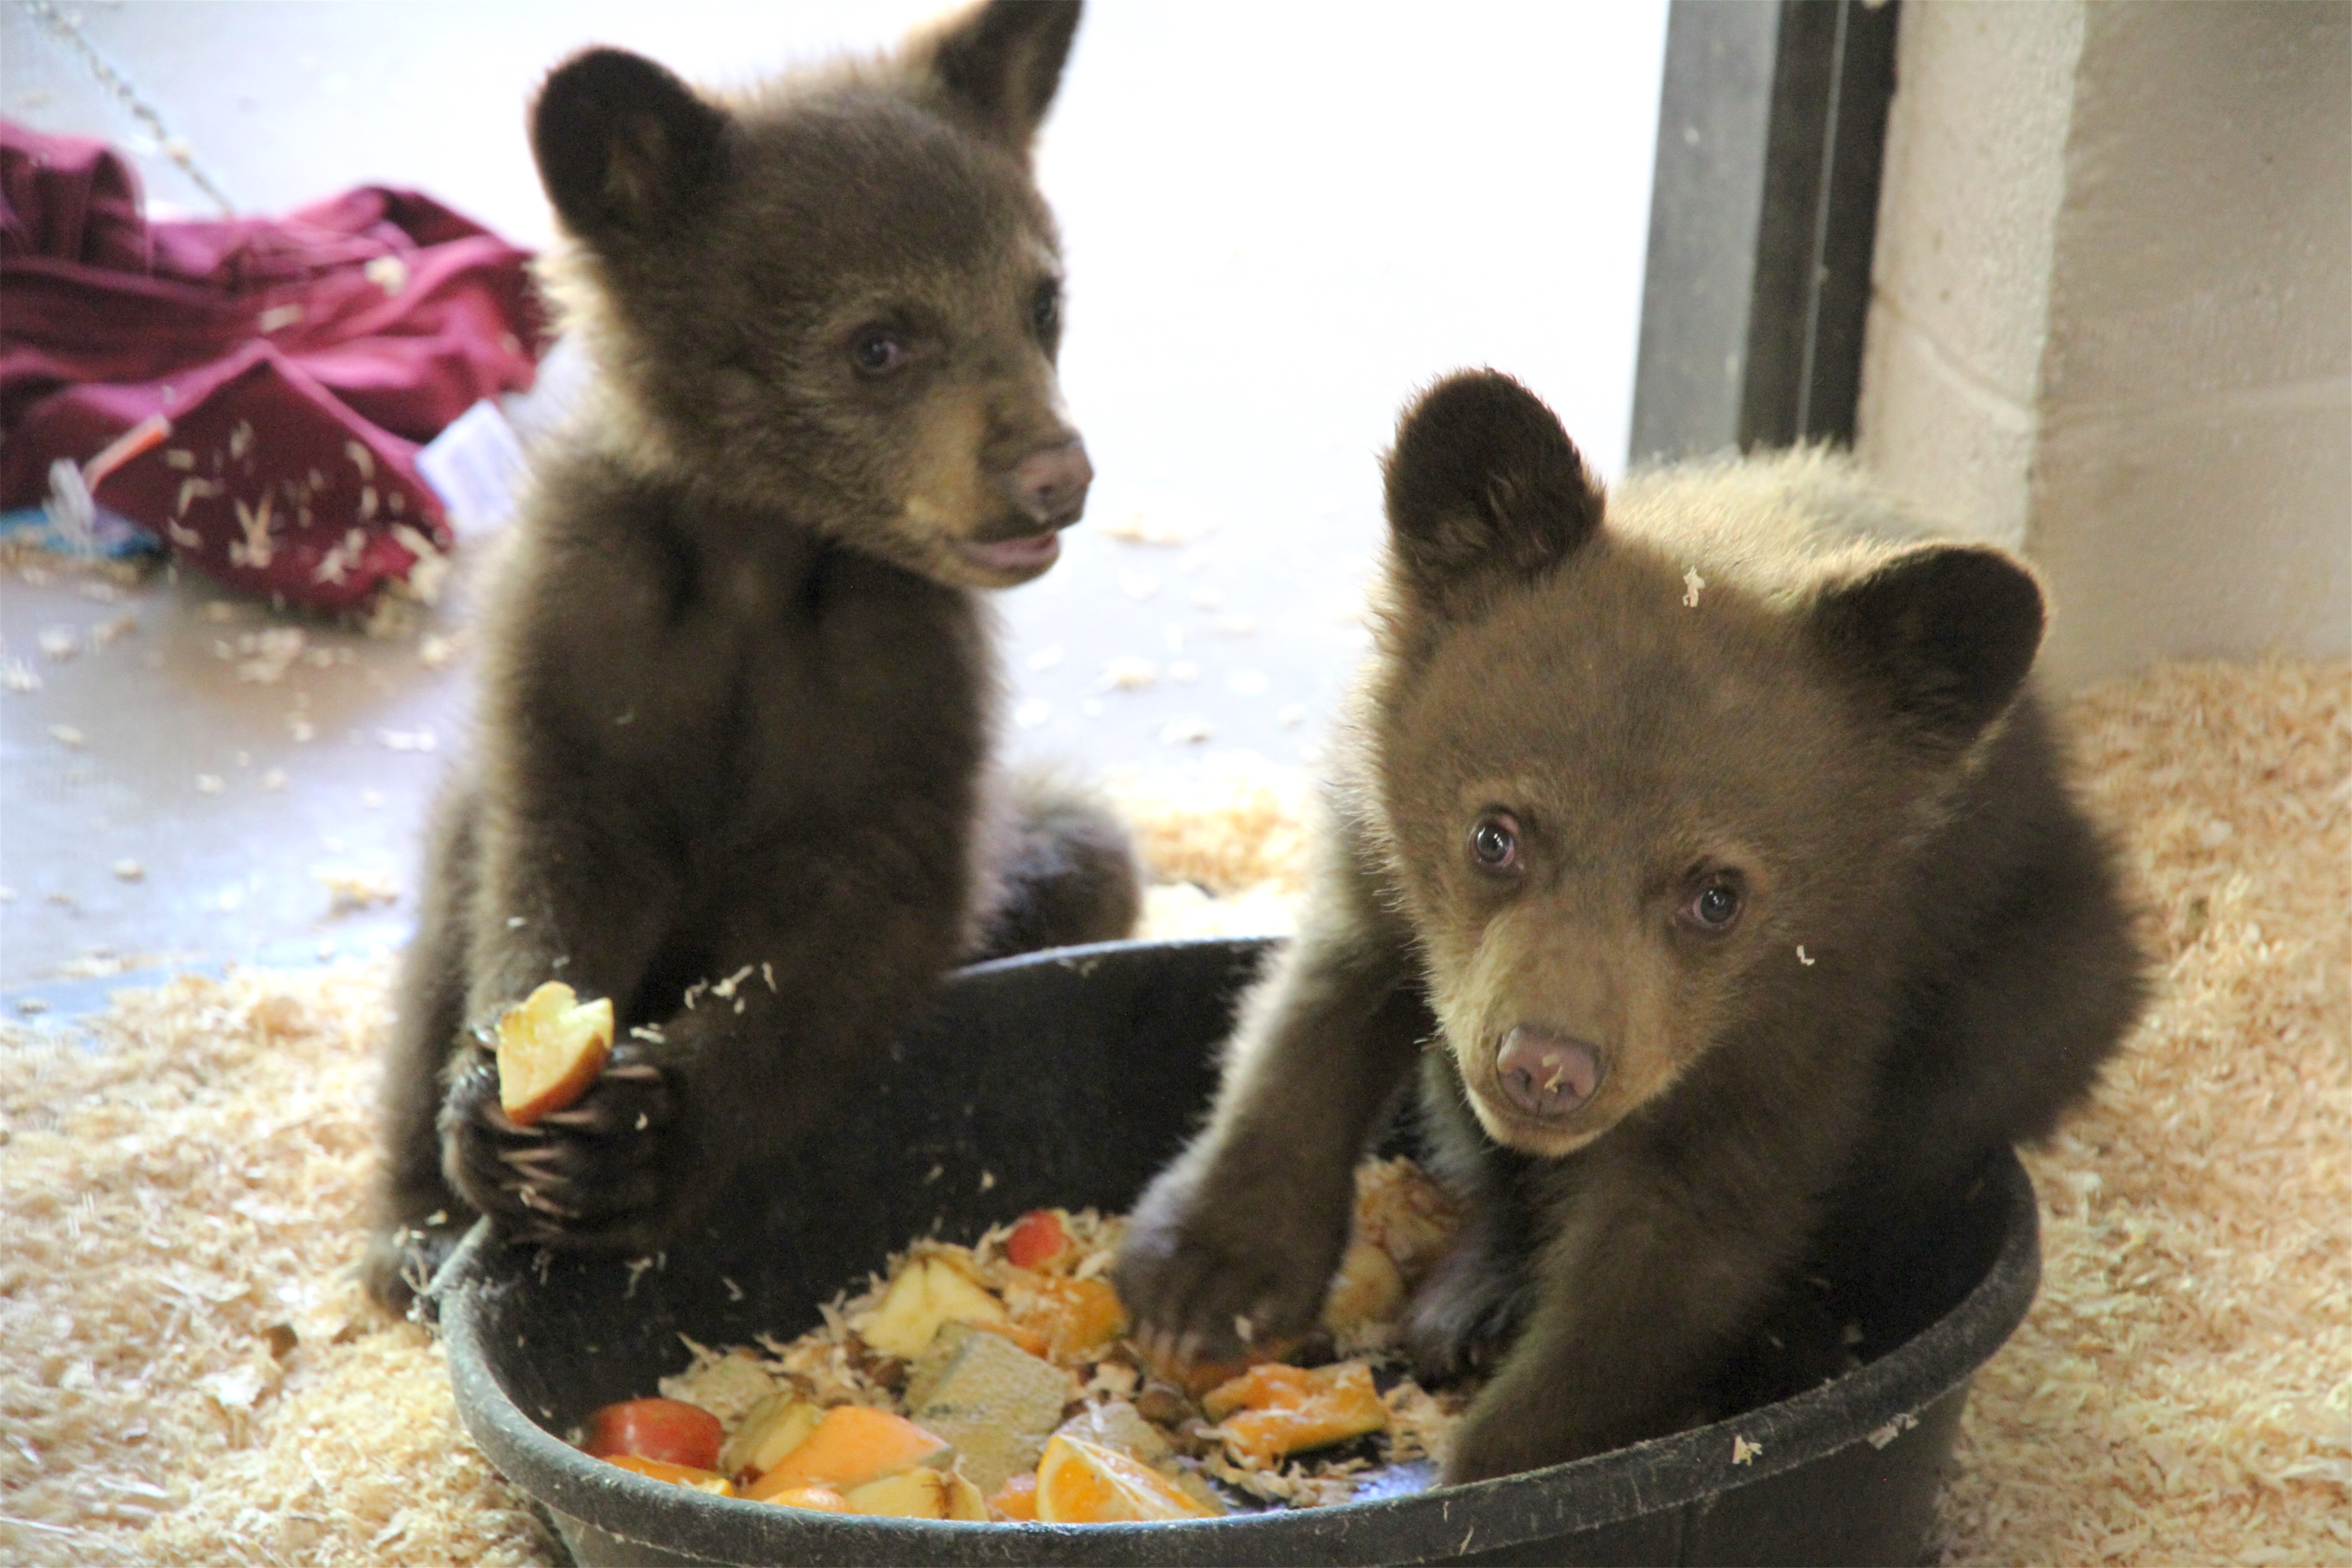 The cubs upon their arrival at Bearizona one year ago.